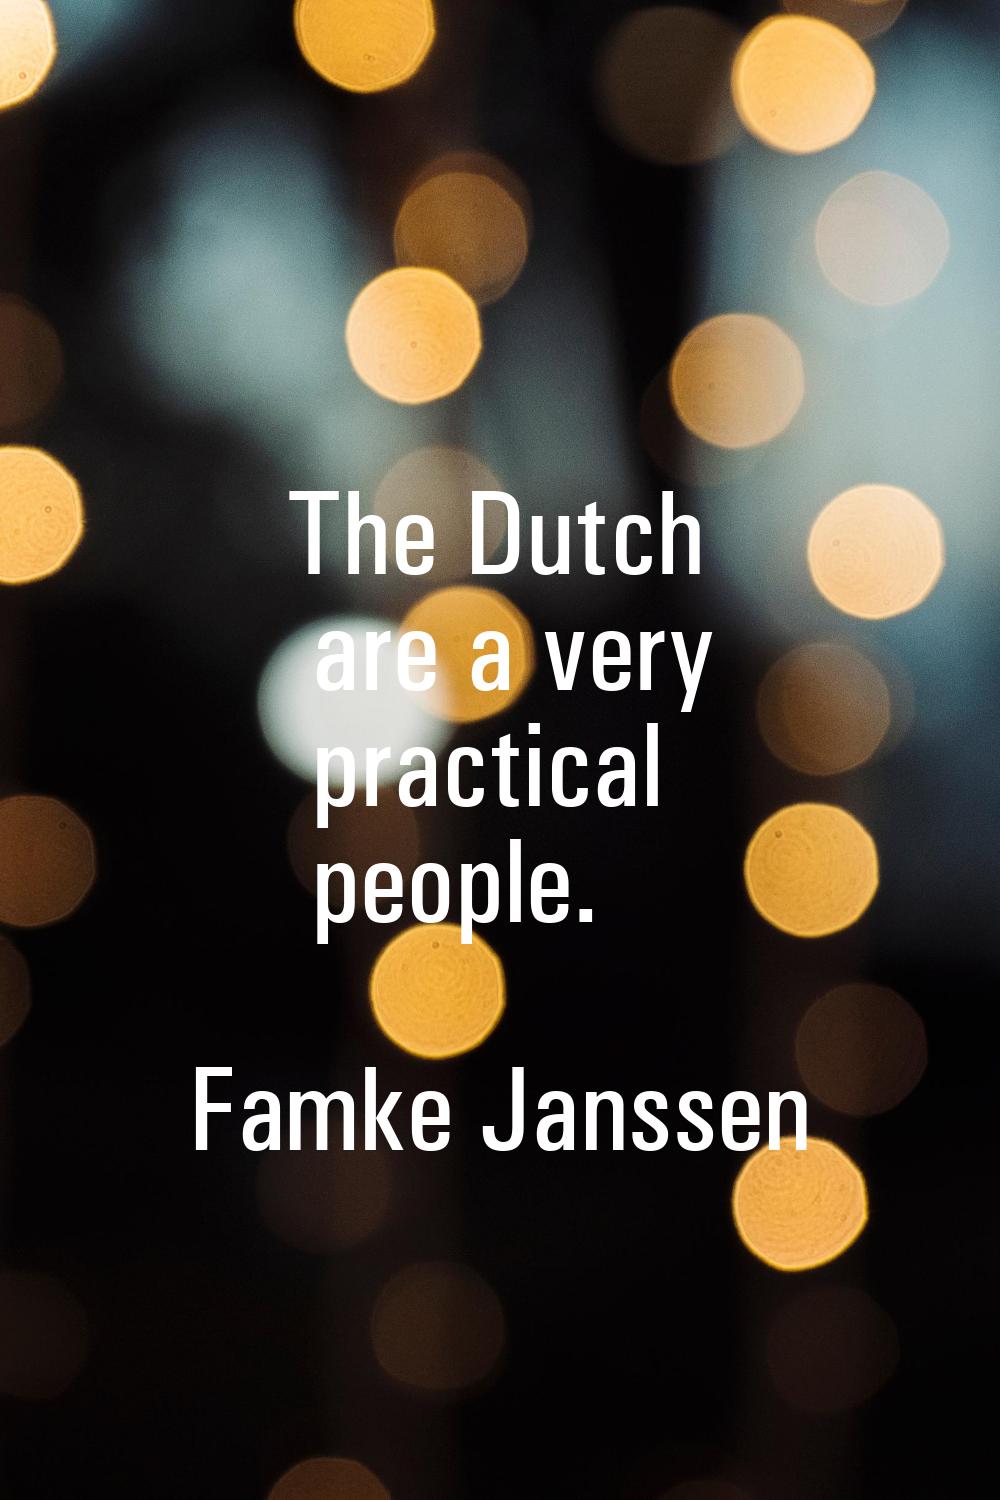 The Dutch are a very practical people.